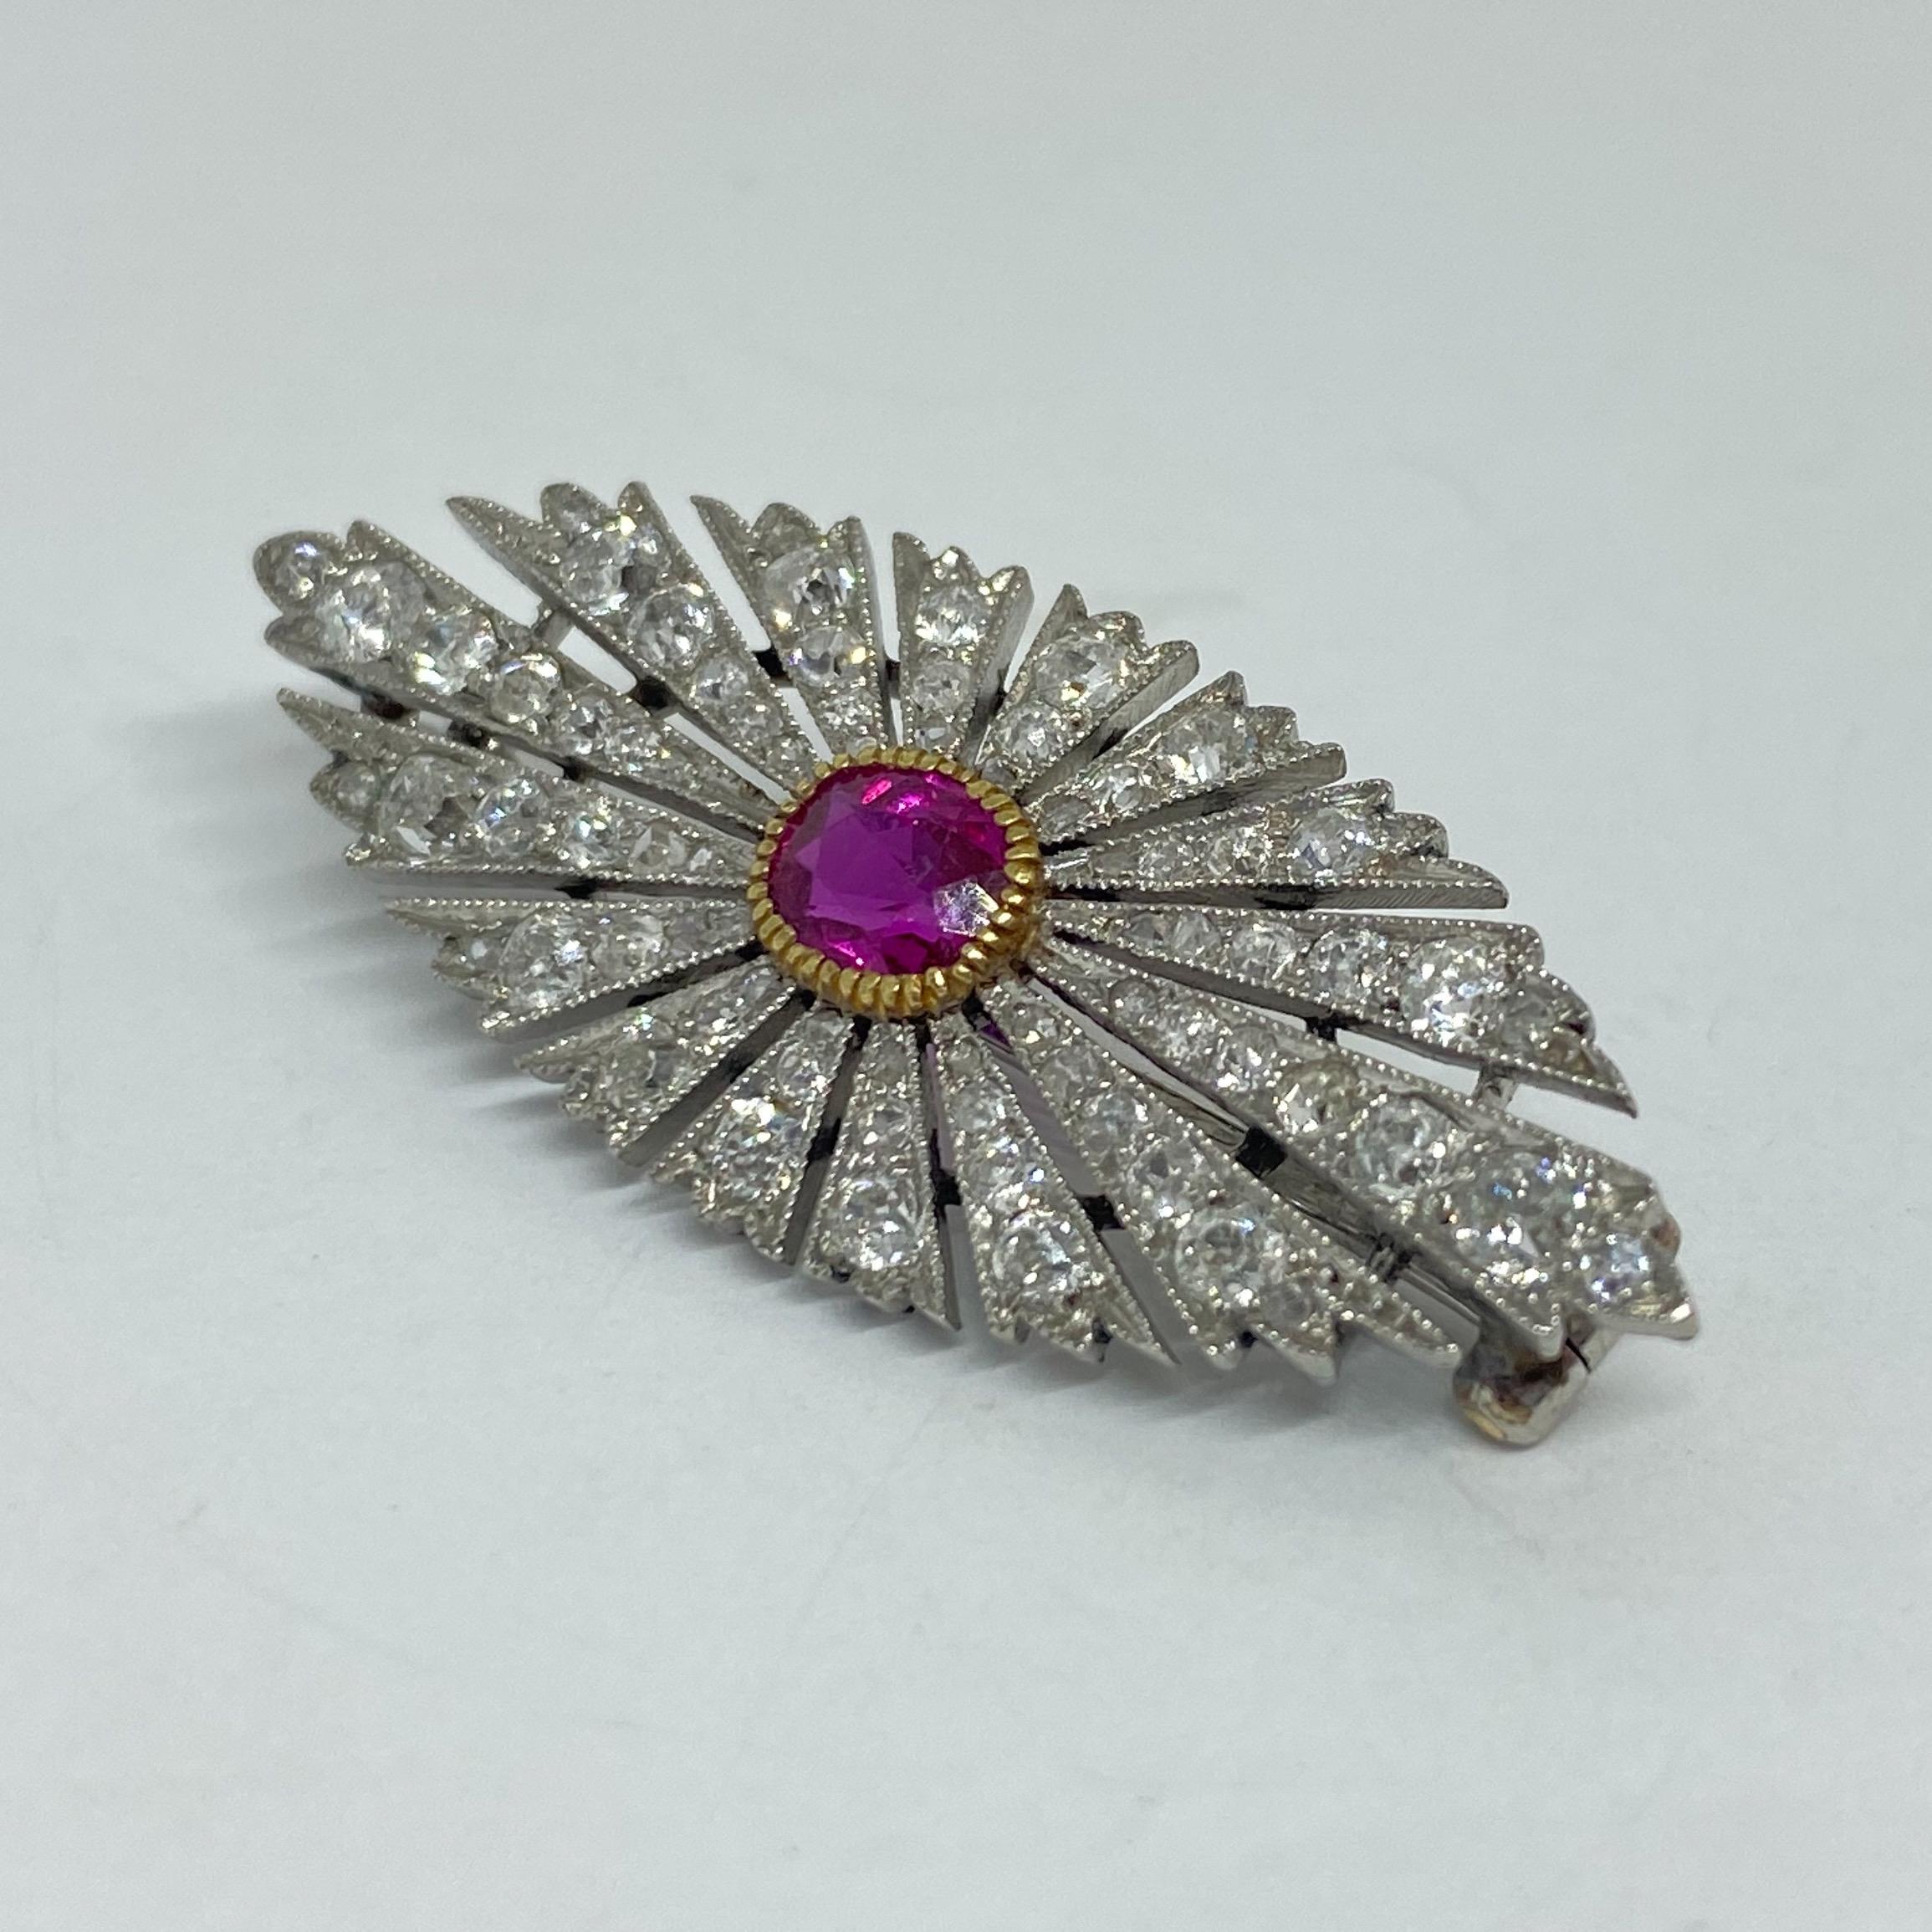 Antique Burma ruby and diamond brooch designed in platinum and 18K yellow gold. Diamonds are set in a marquise sun burst with milgrain and cutout rays. The center ruby is set in a yellow gold milgrain bezel. Hinged pin brooch with curled 